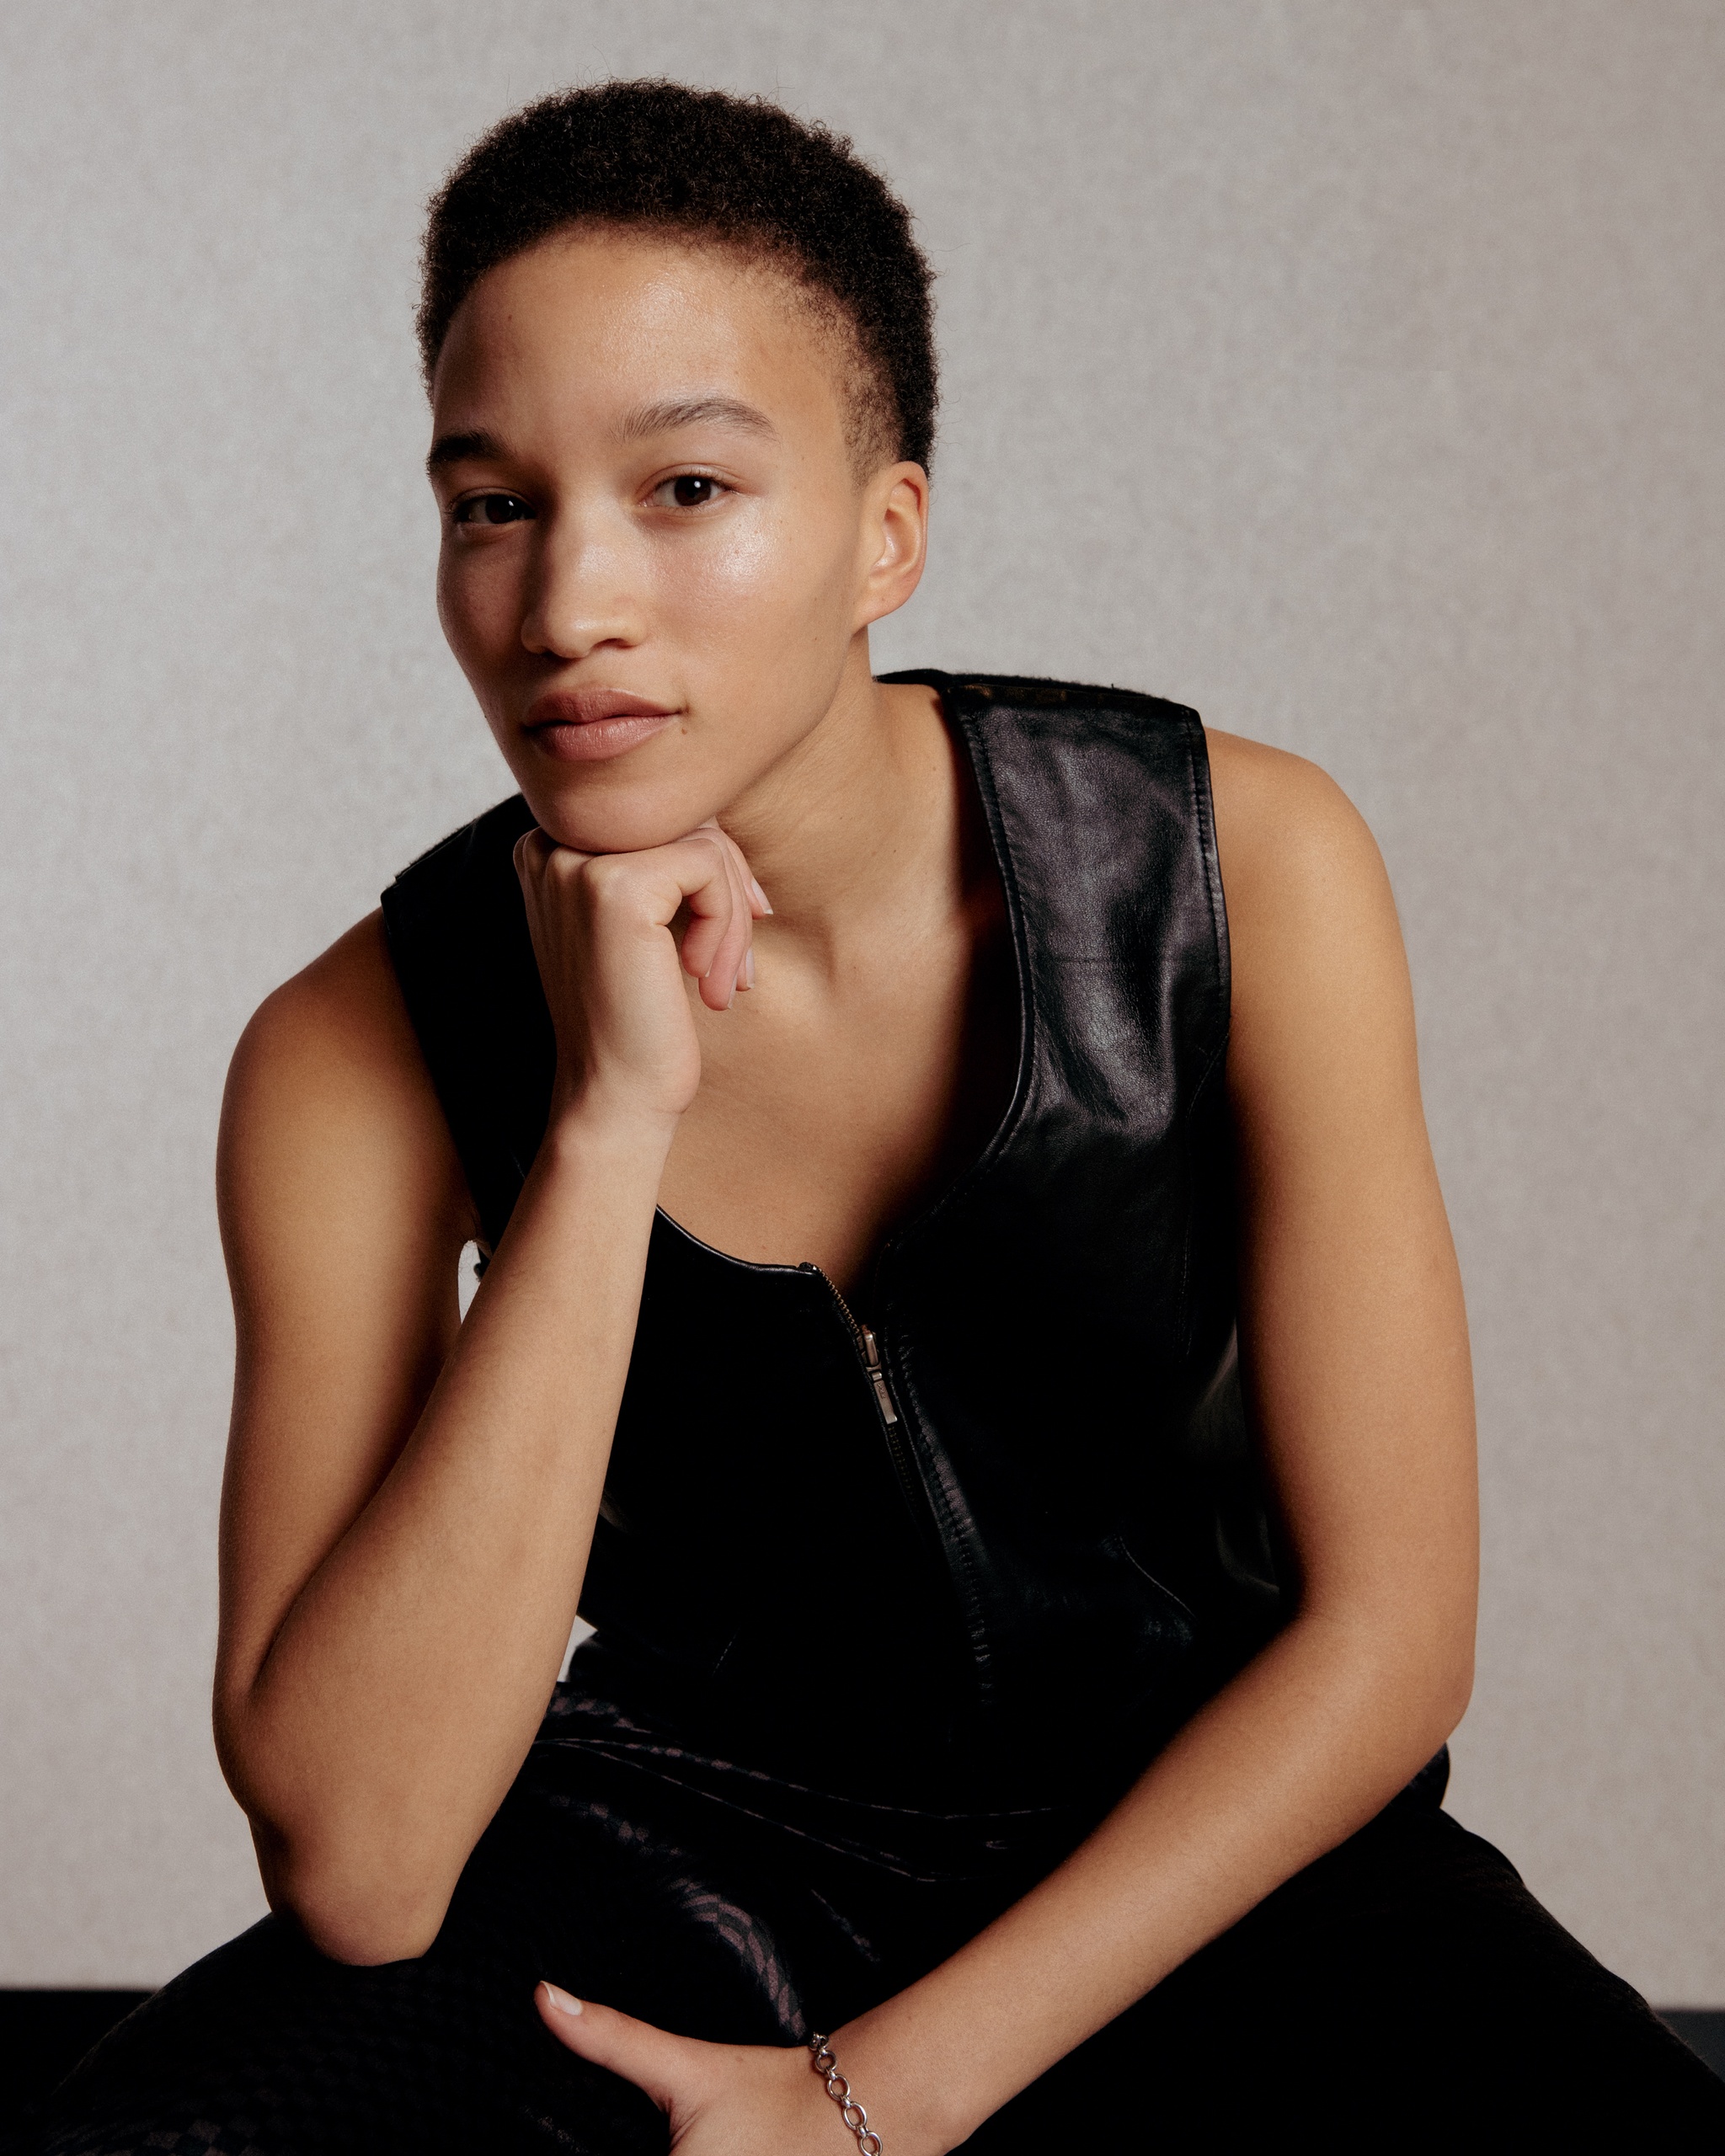 A portrait of artist Asia Stewart, a Black woman with light brown skin who poses with her elbow on her knee and her chin supported by a loose fist. She looks directly at us from a three quarter profile with one eyebrow slightly raised. Asia has short hair and wears a black leather vest. Photo by Dana Golan